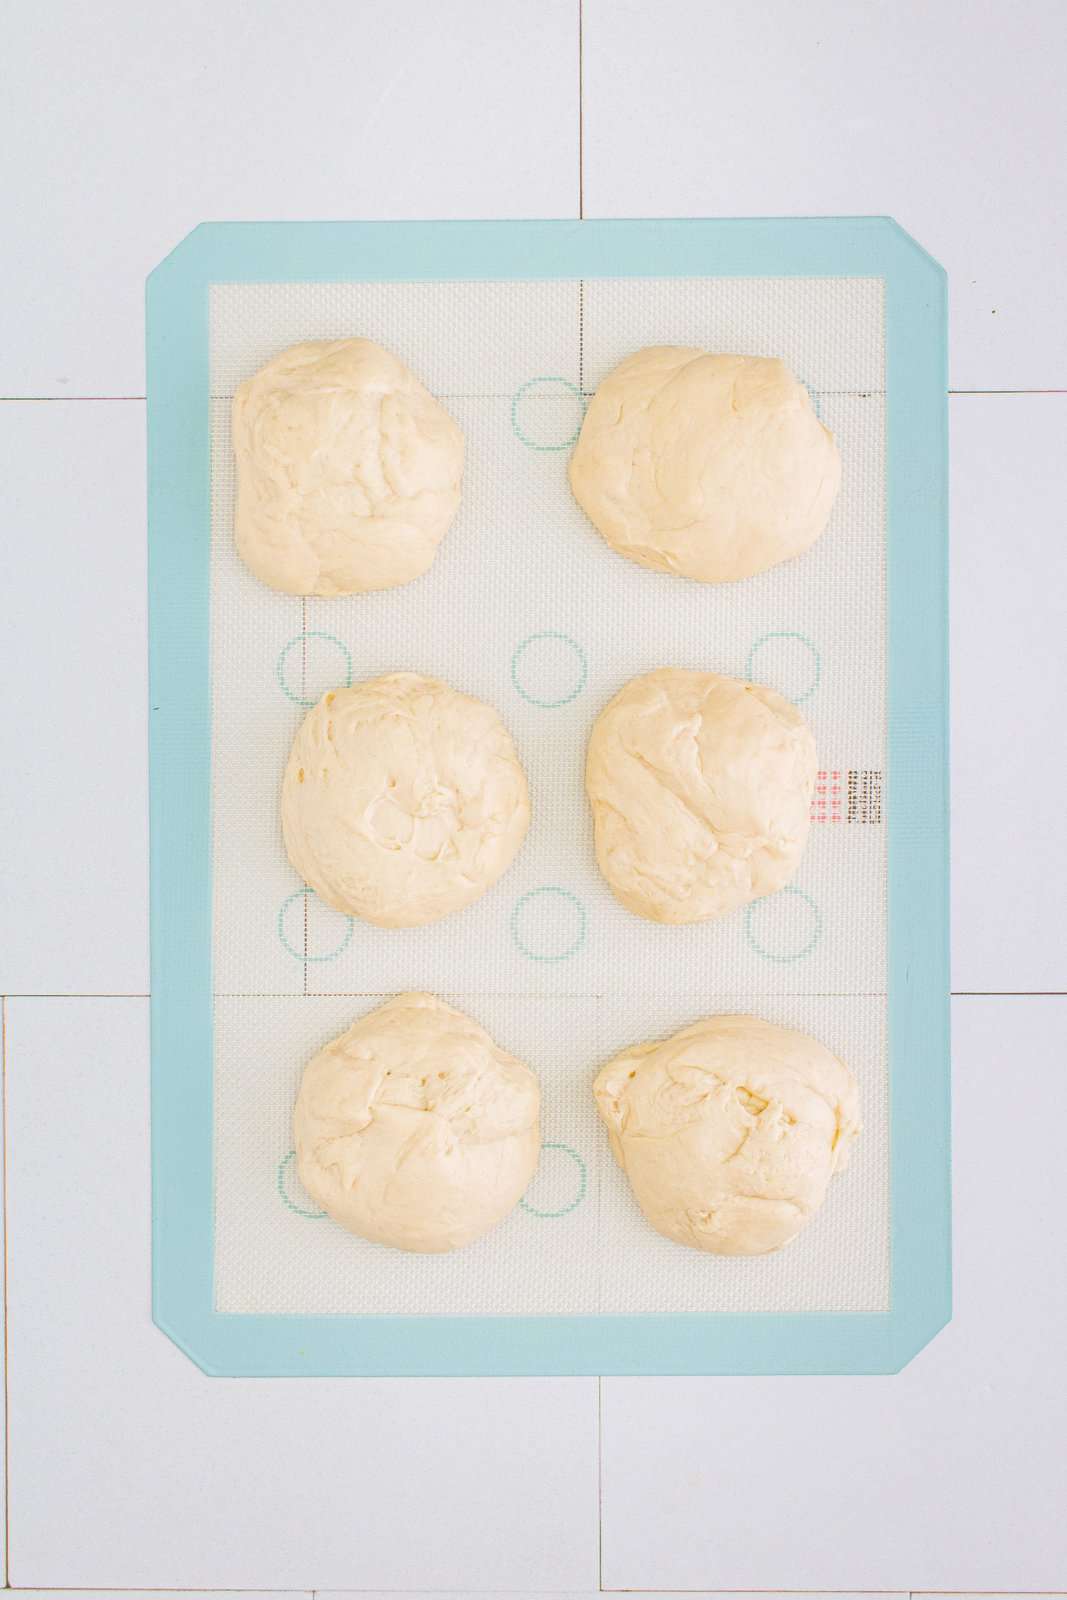 Dough separated into 6 portions.